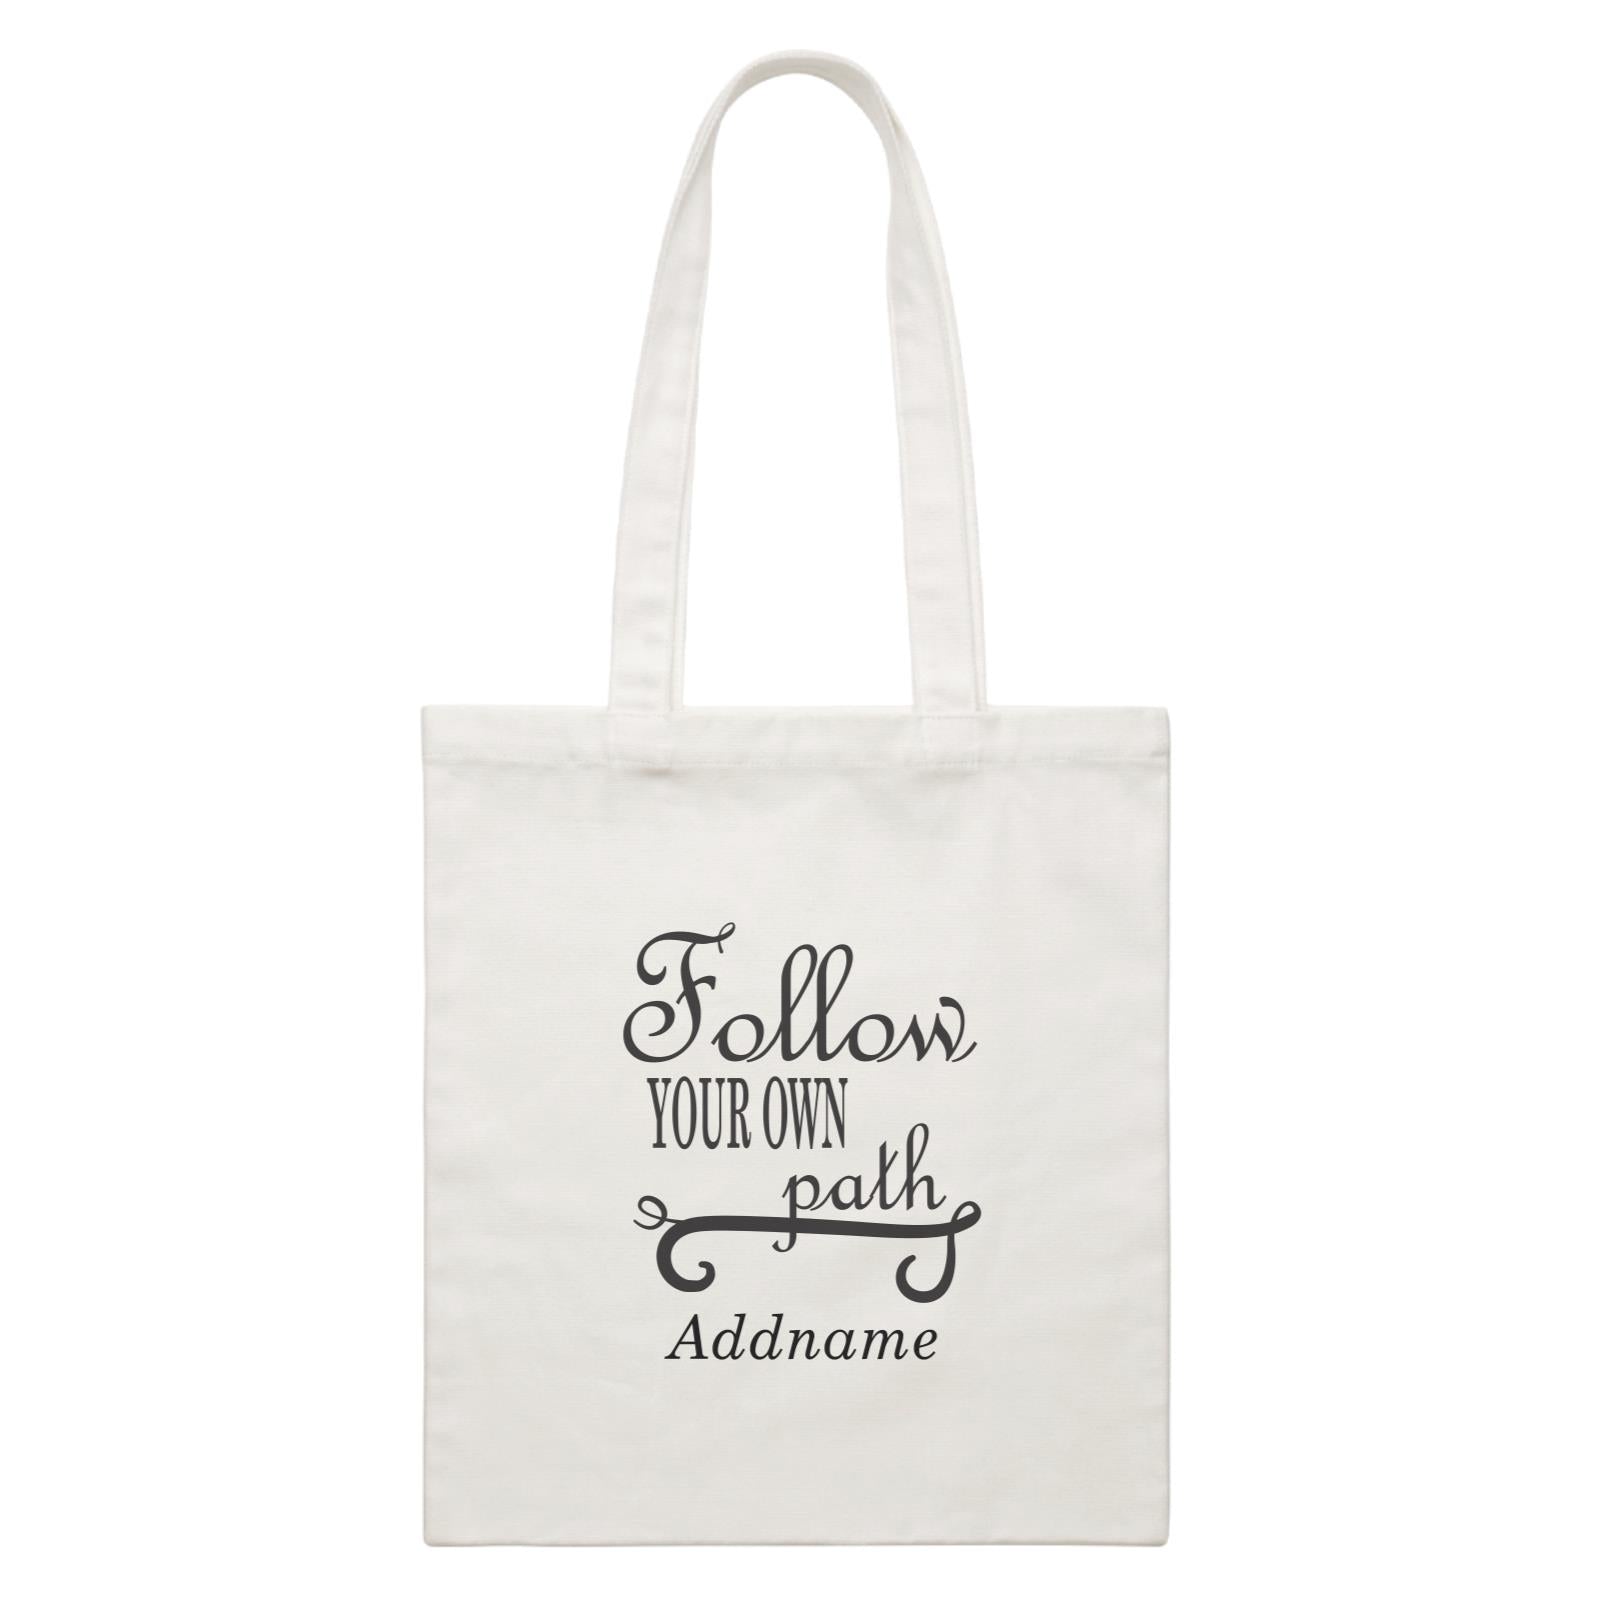 Inspiration Quotes Follow Your Own Path Addname White Canvas Bag